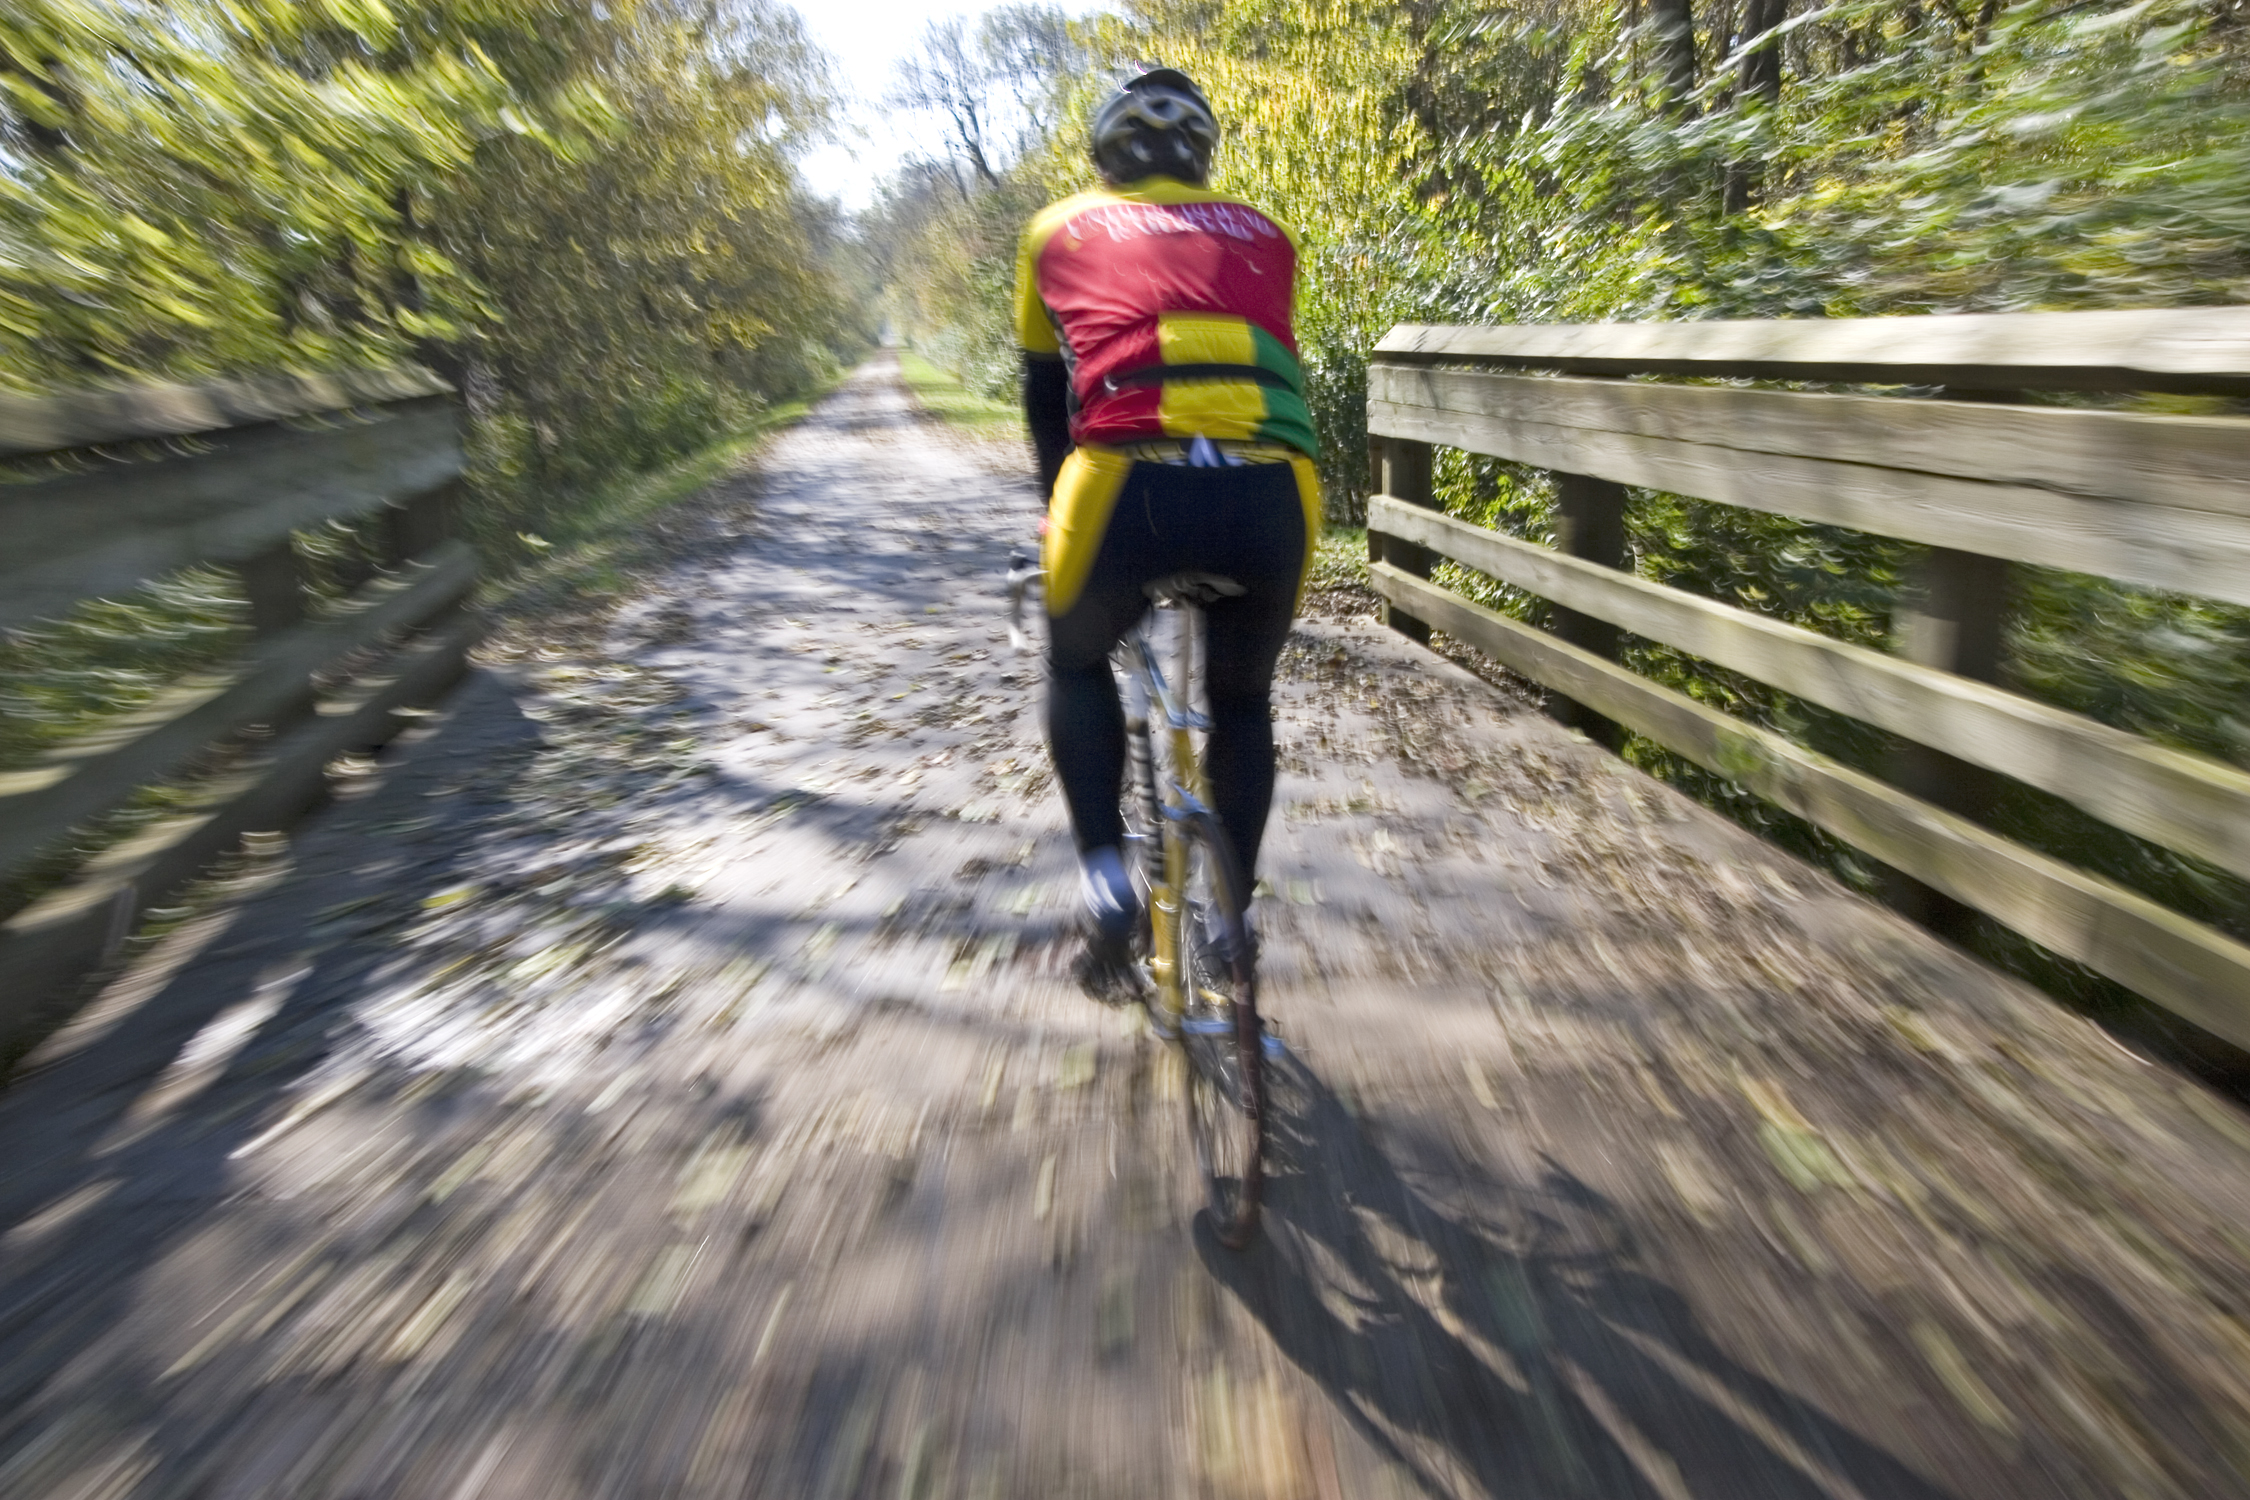 Underground Railroad Cycling Route Expanded Bicycle Retailer And intended for Cycling Routes